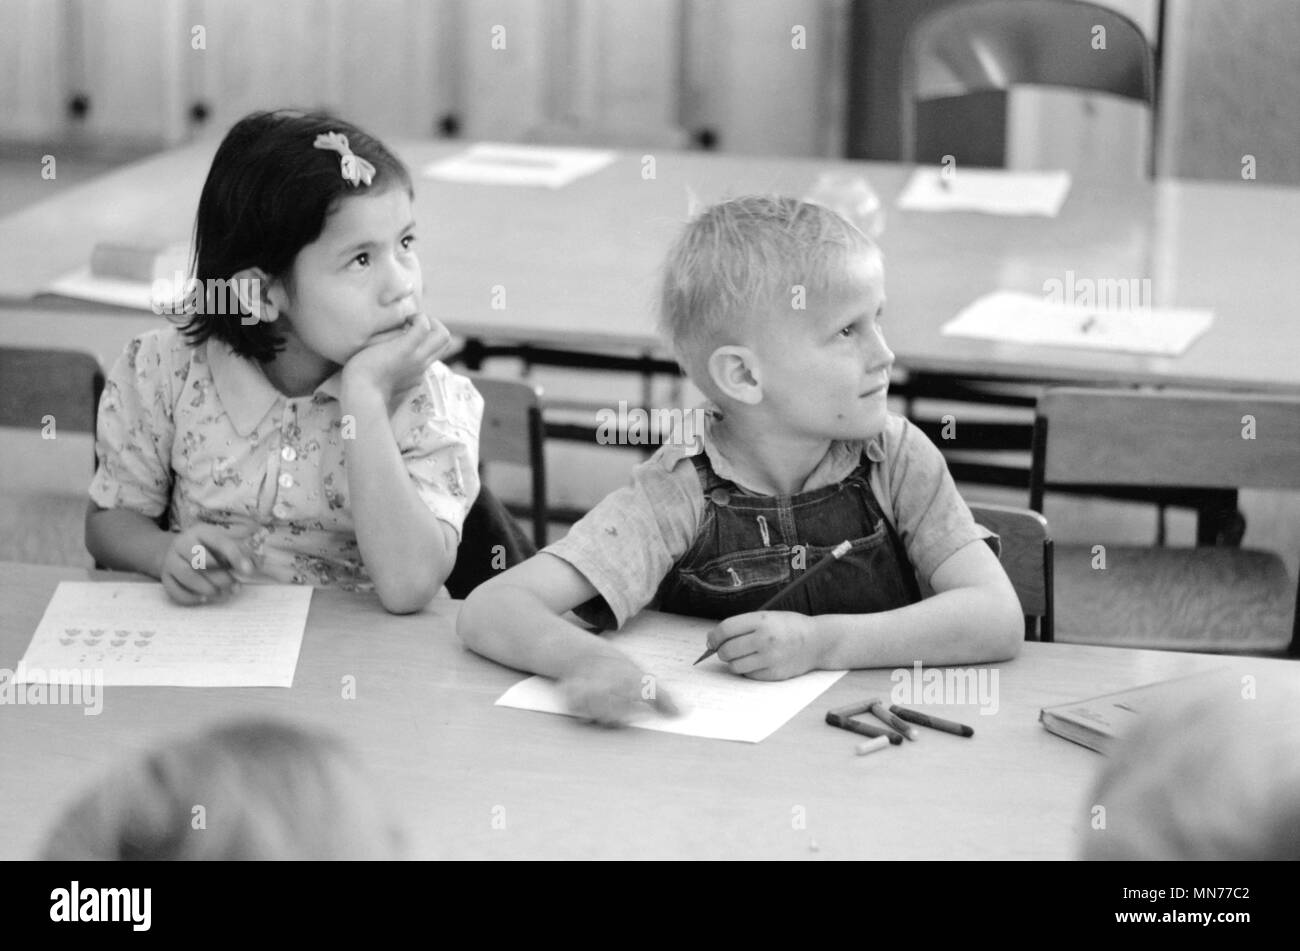 Two Children of Migratory Workers in Elementary School Classroom at FSA Camp, Weslaco, Texas, USA, Arthur Rothstein for Farm Security Administration, February 1942 Stock Photo